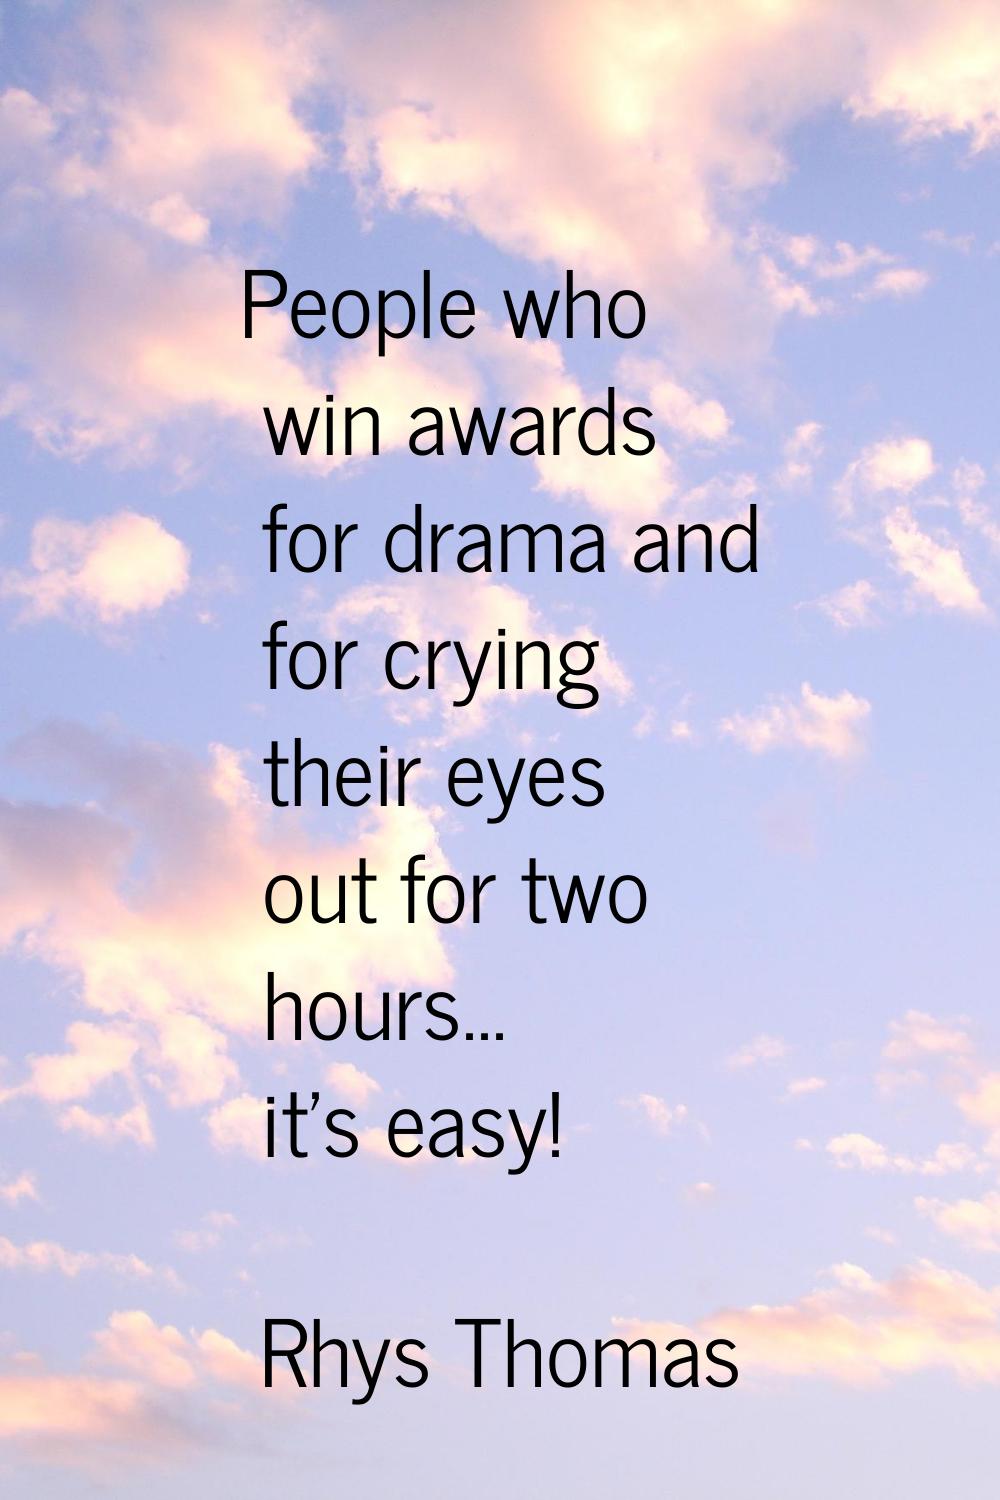 People who win awards for drama and for crying their eyes out for two hours... it's easy!